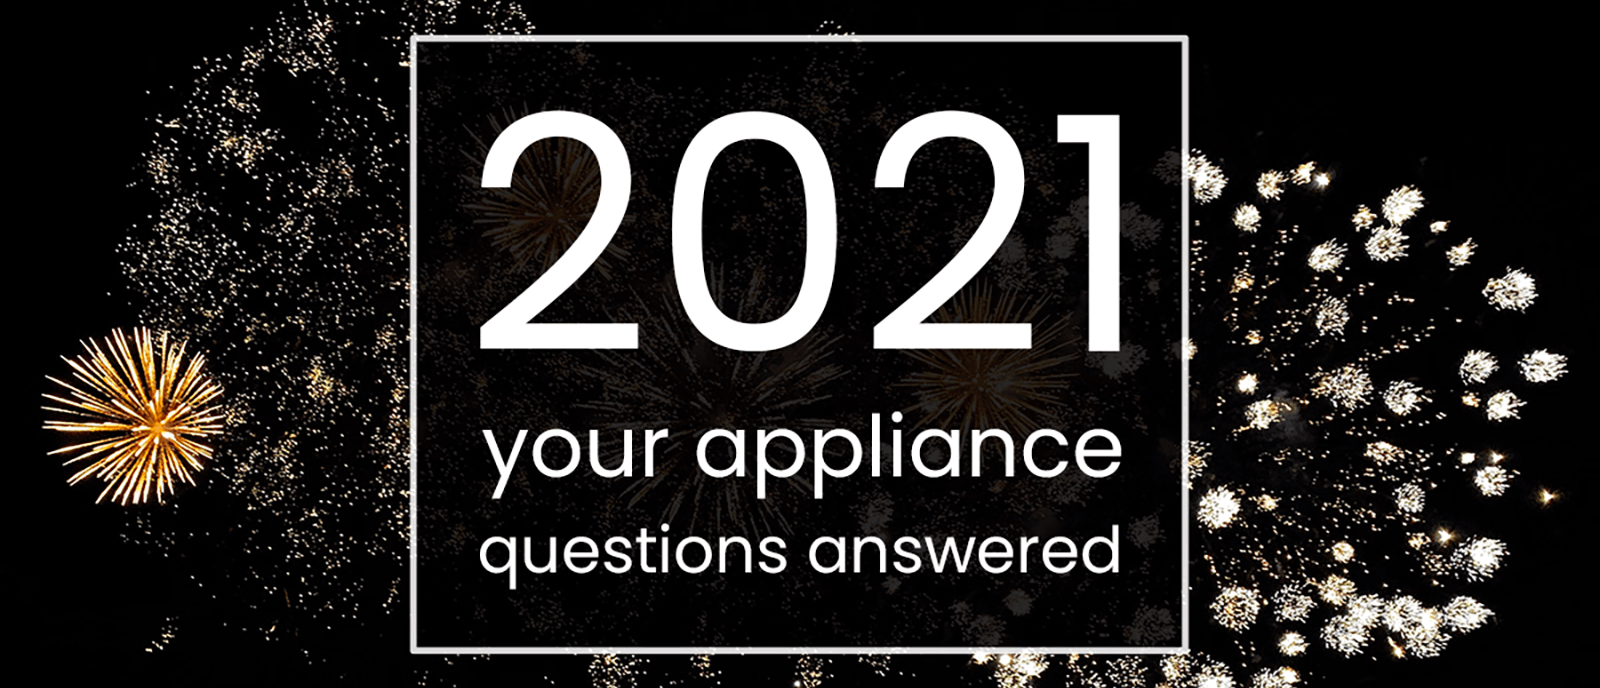 2021 appliance questions answered